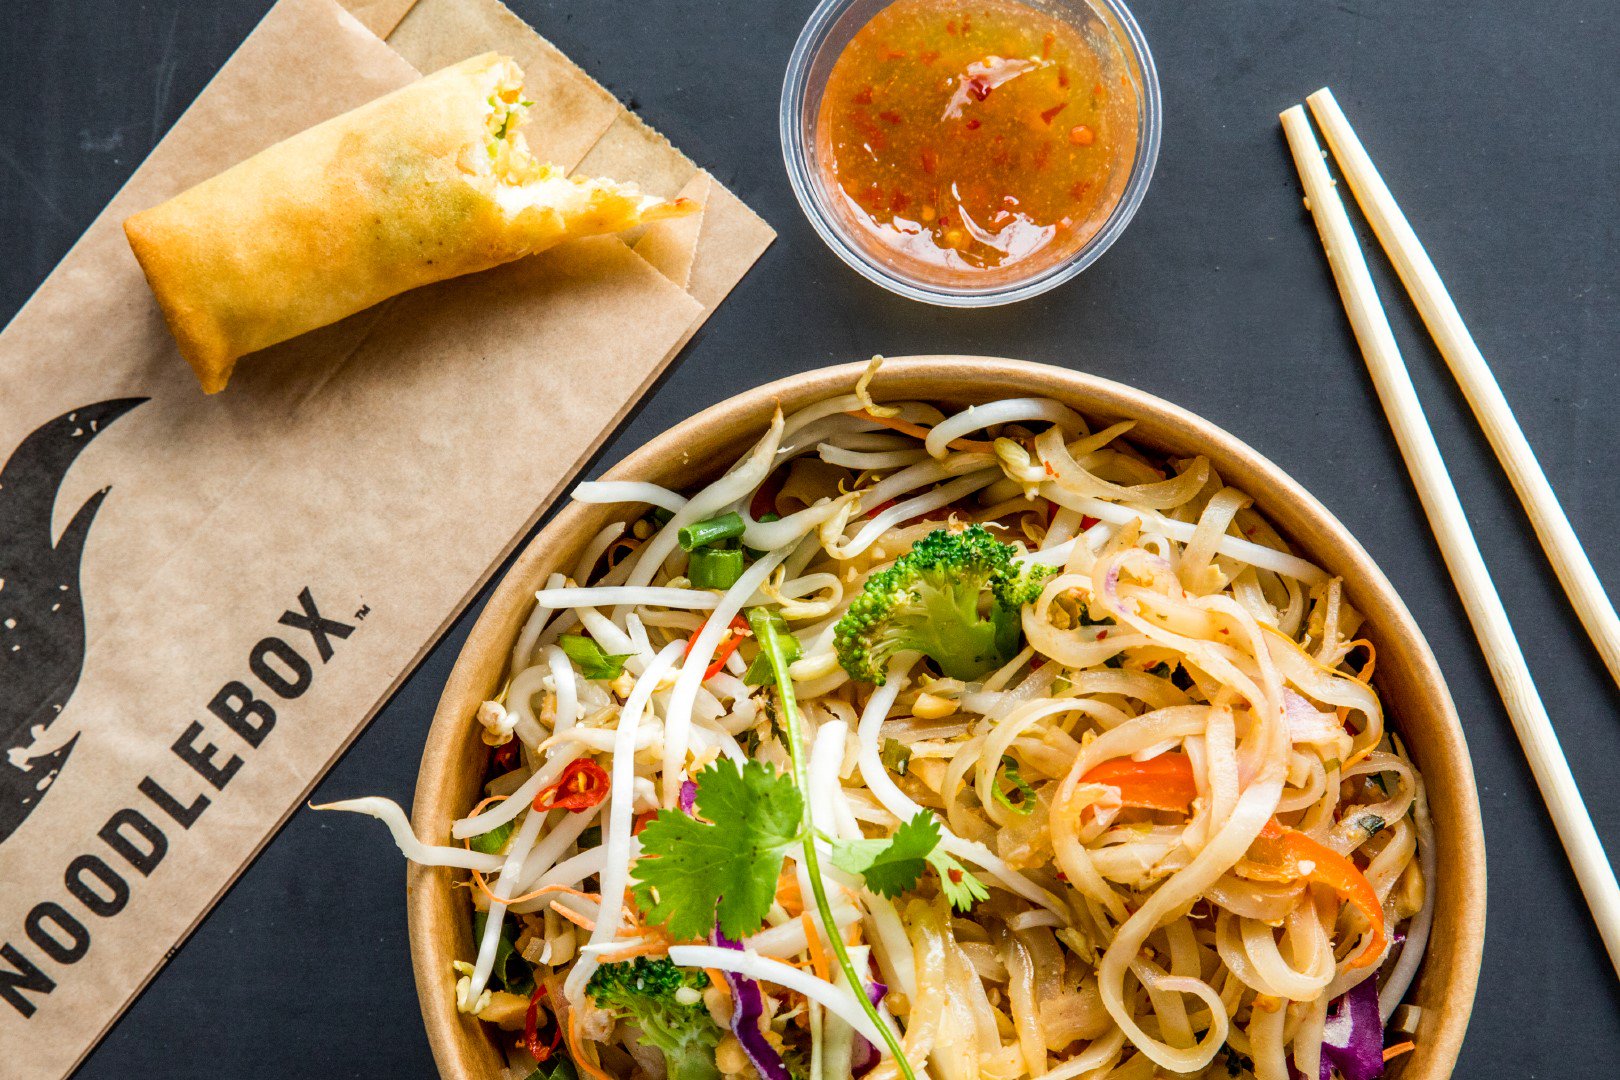 Noodlebox In Food Hall At Woodbine Racetrack And Great Canadian Casino Resort Toronto .jpg